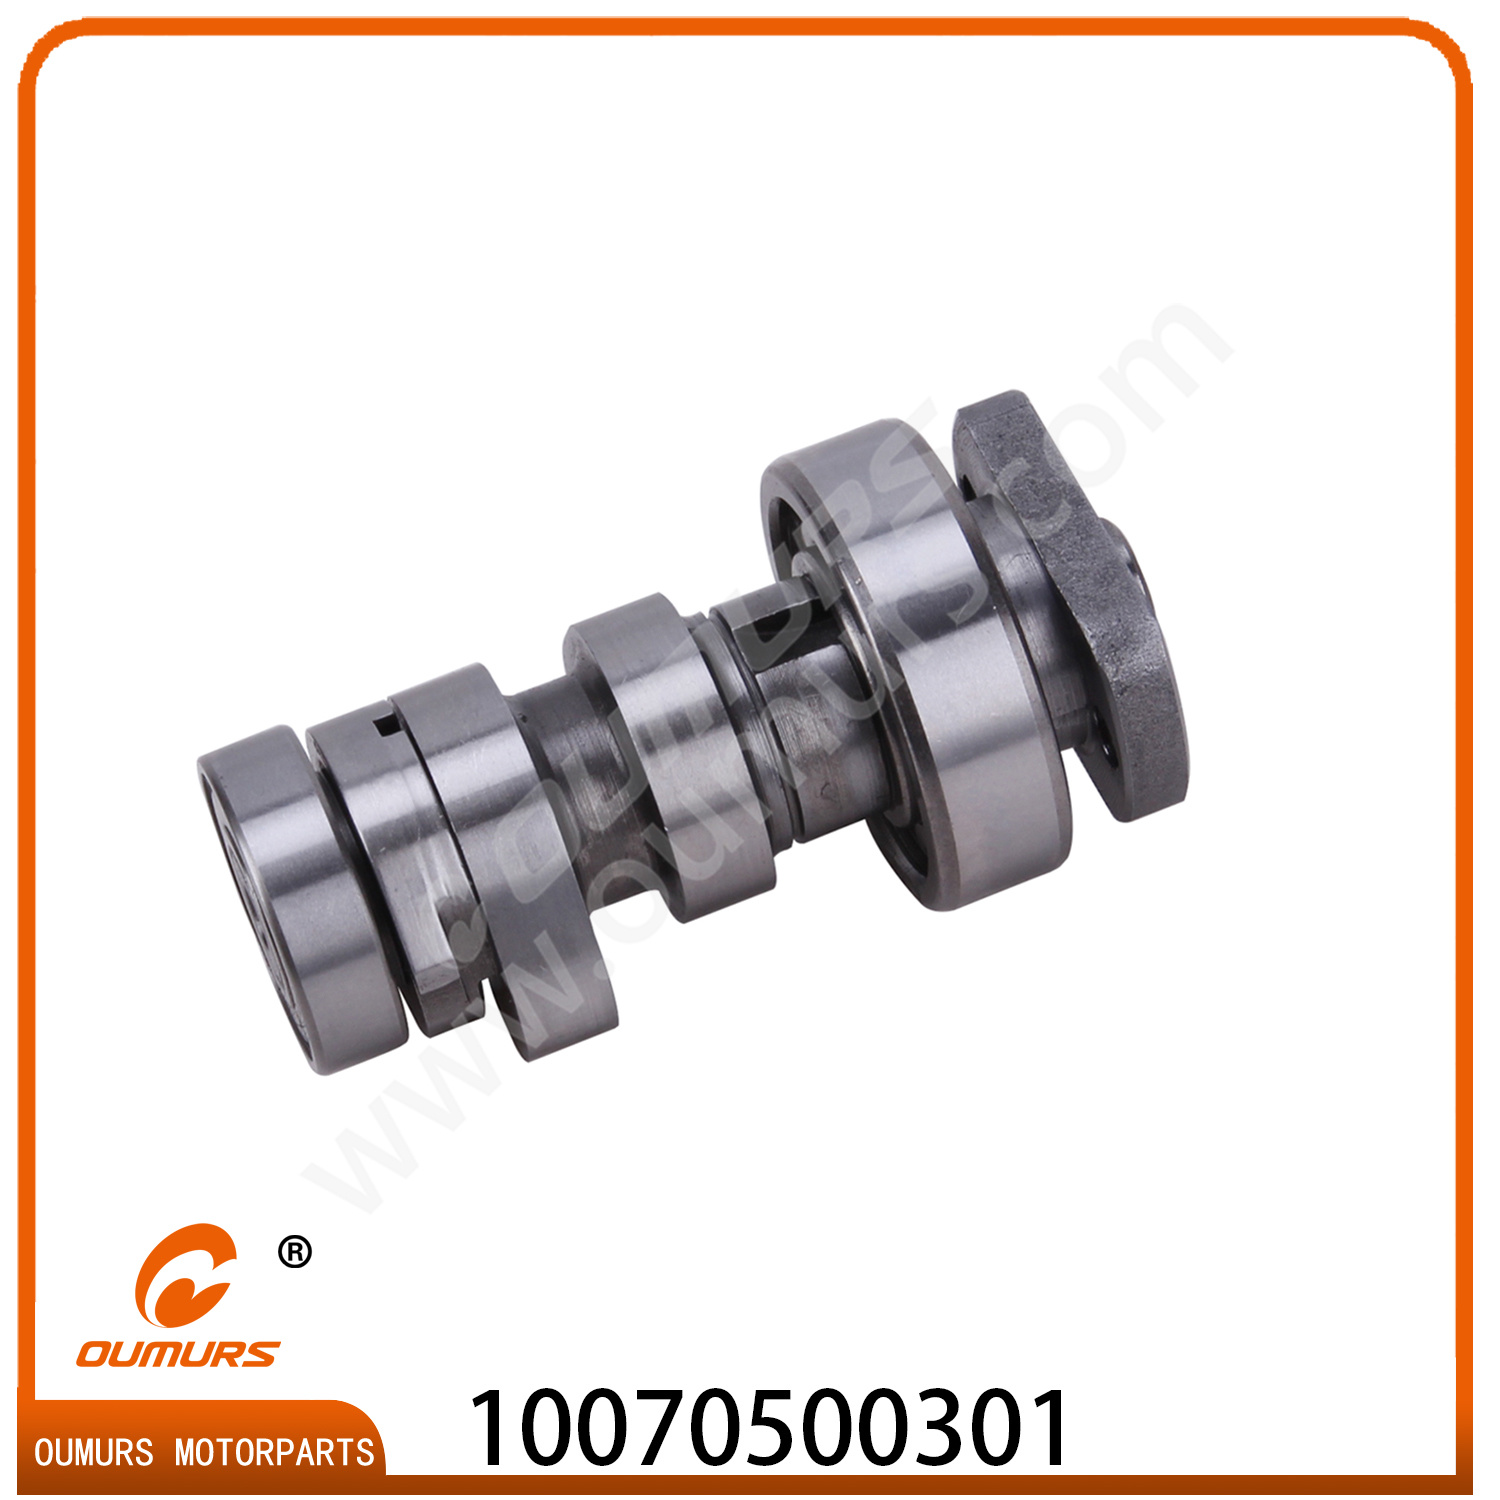 Motorcycle Spare Part Motorcycle Camshaft for Symphony St-Oumurs